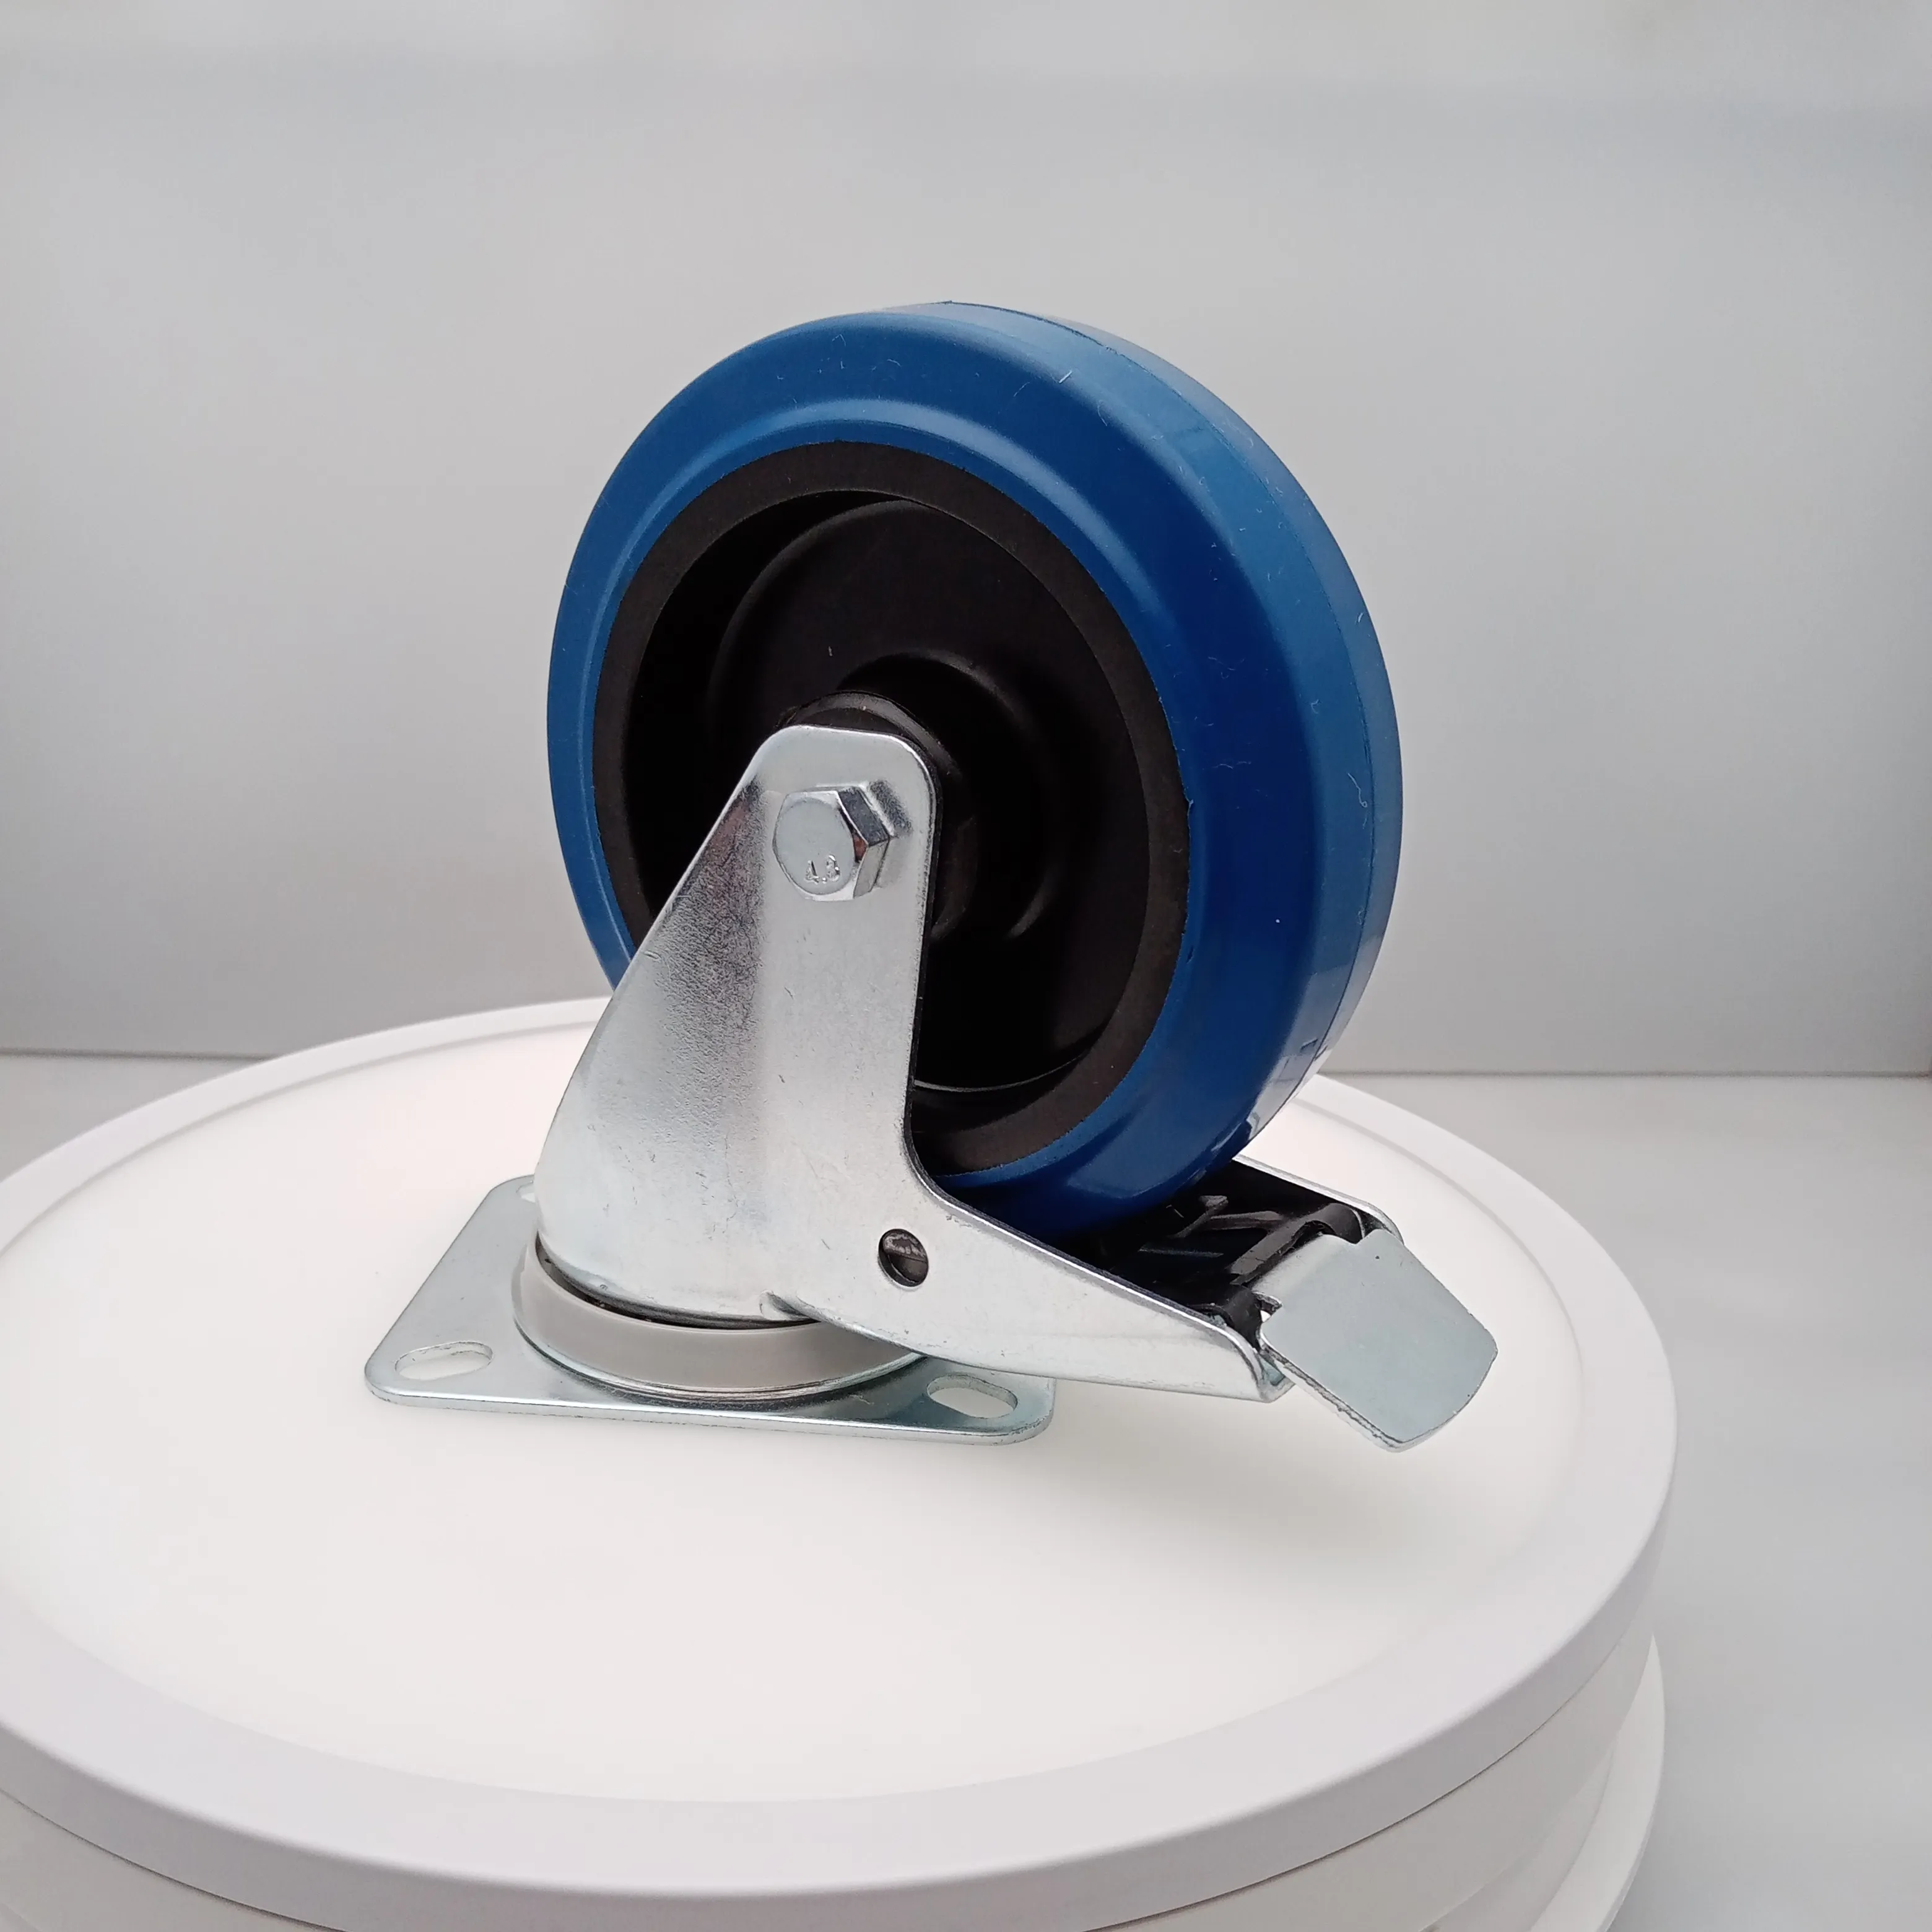 Swivel caster wheel with metal tread brake manufacturers can customize 4 / 5 / 6 / 8 inch bottom plate nylon casters wholesale